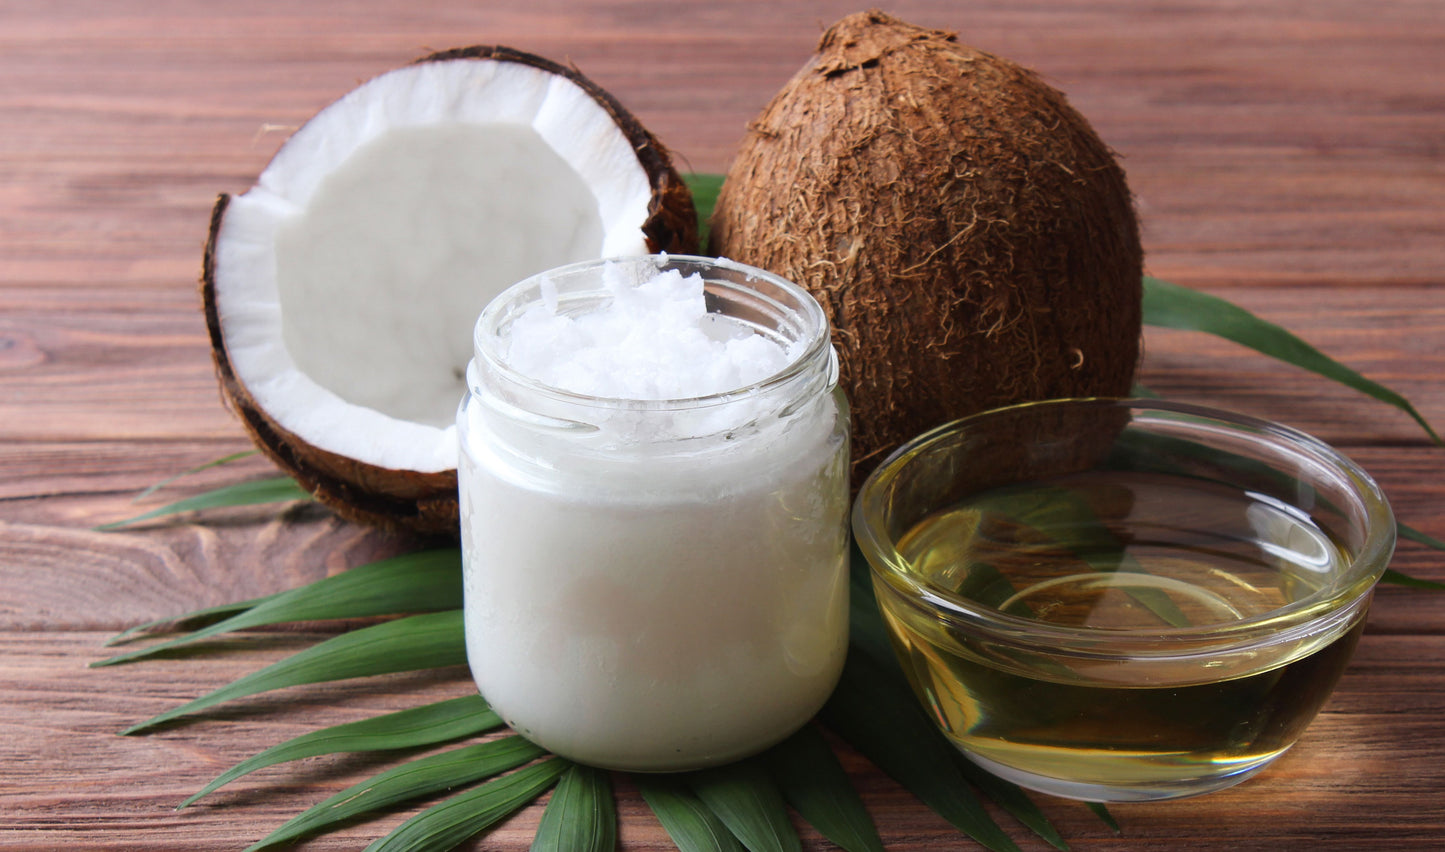 COCONUT OZONATED OIL FACE MASK IDEAS AND INSPIRATION